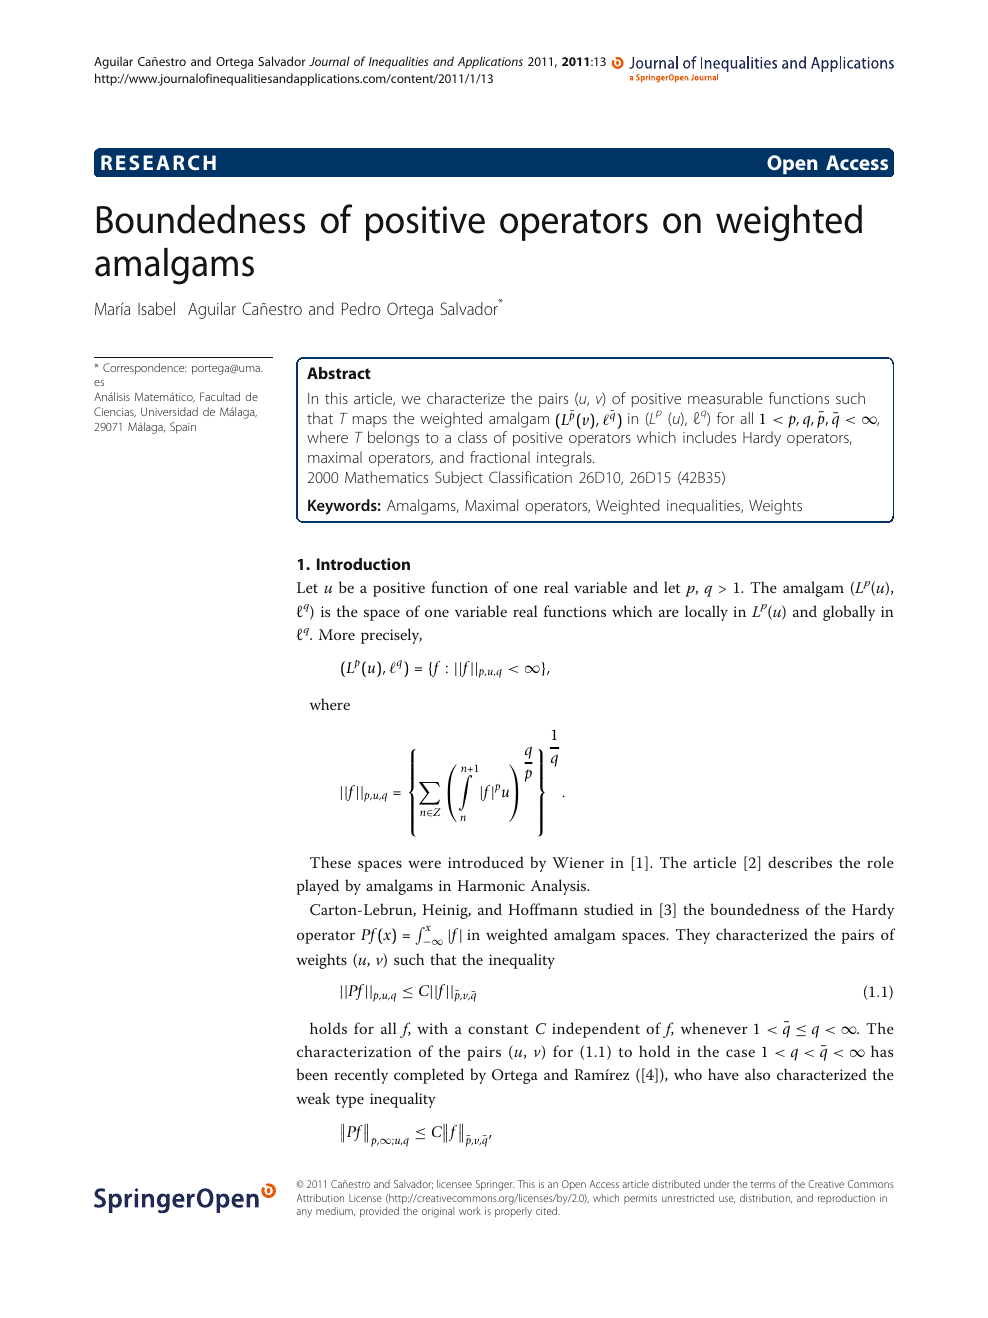 Boundedness Of Positive Operators On Weighted Amalgams Topic Of Research Paper In Mathematics Download Scholarly Article Pdf And Read For Free On Cyberleninka Open Science Hub